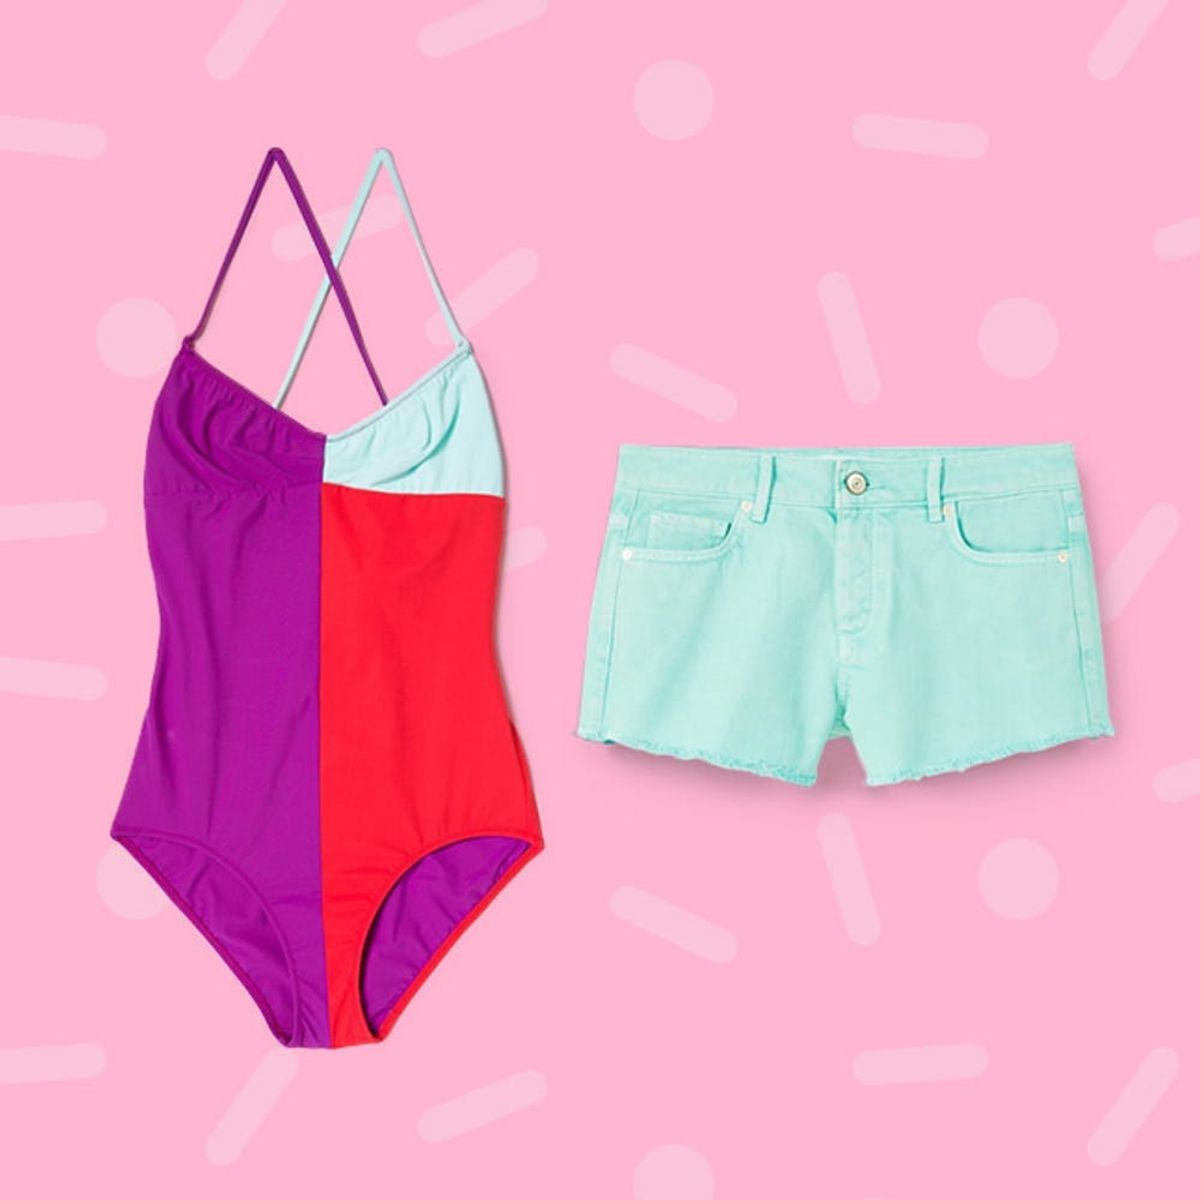 11 Unexpected Color Combos to Add to Your Summer Wardrobe